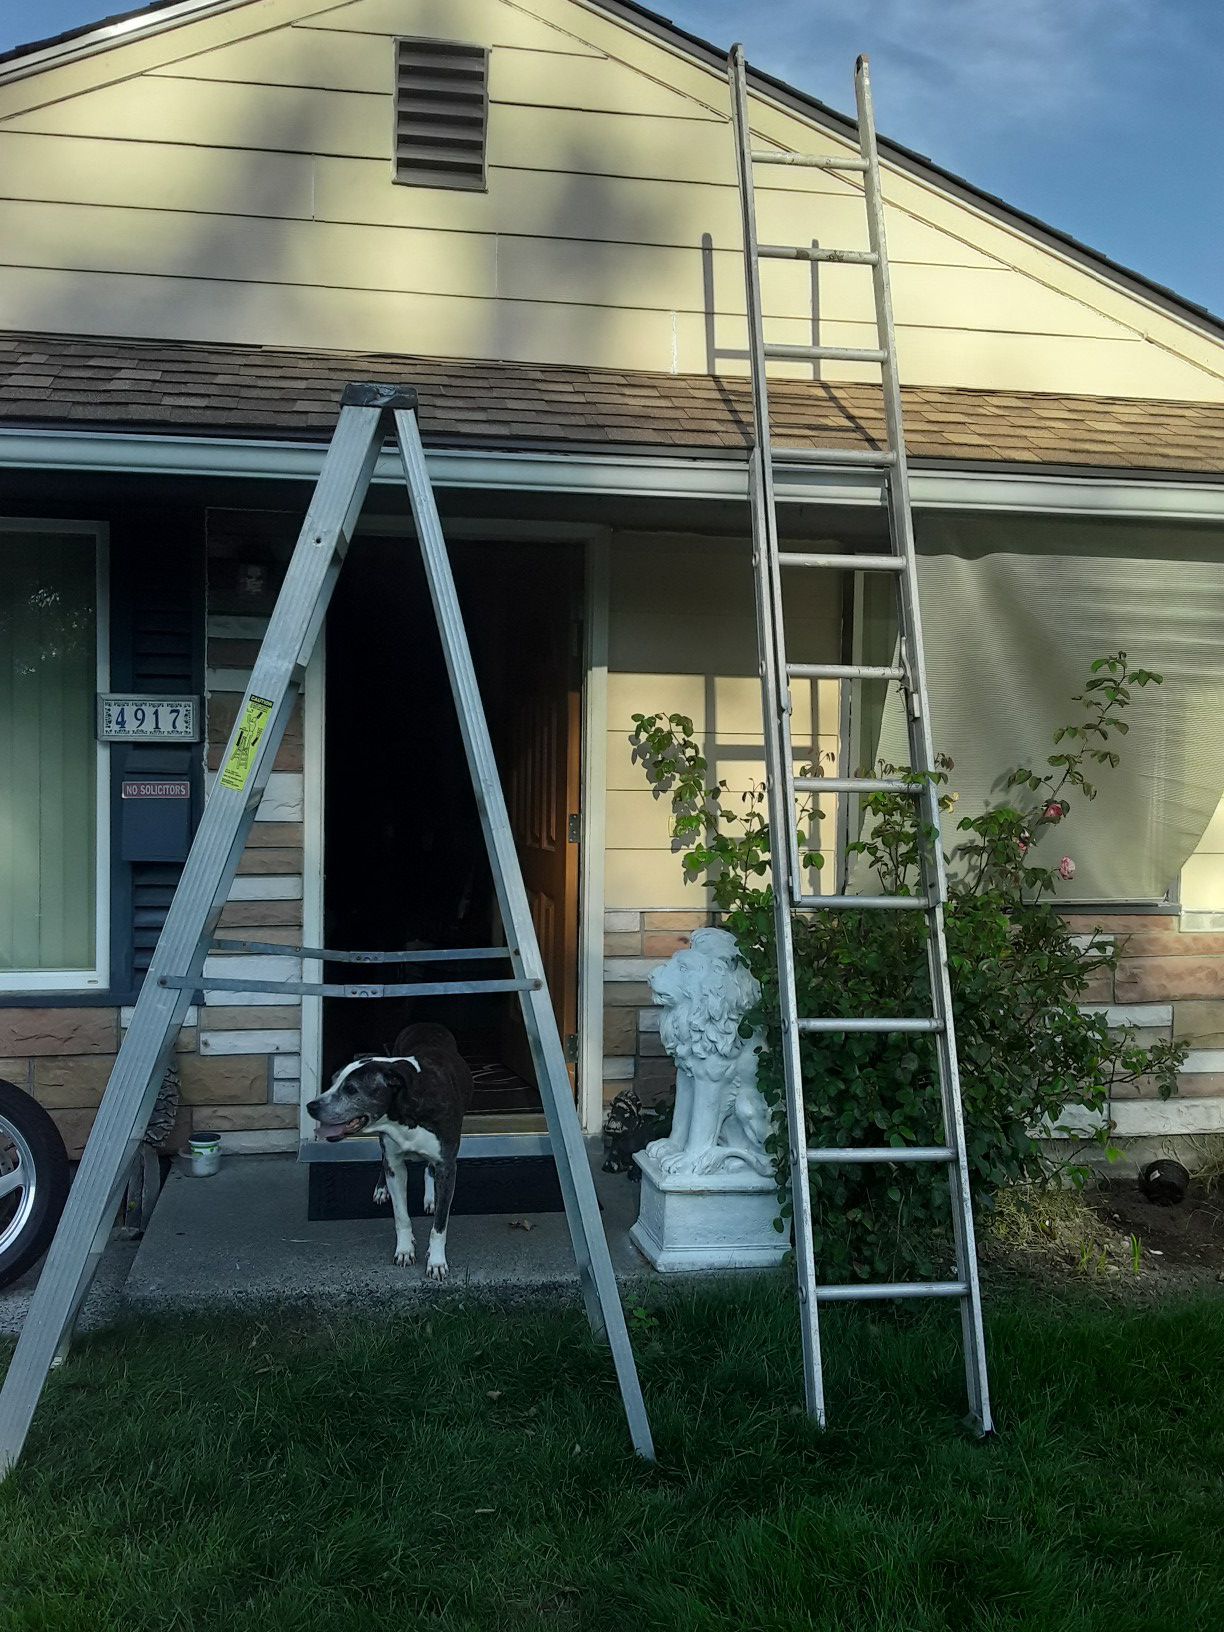 Ladders for sale 50 bucks for both firm